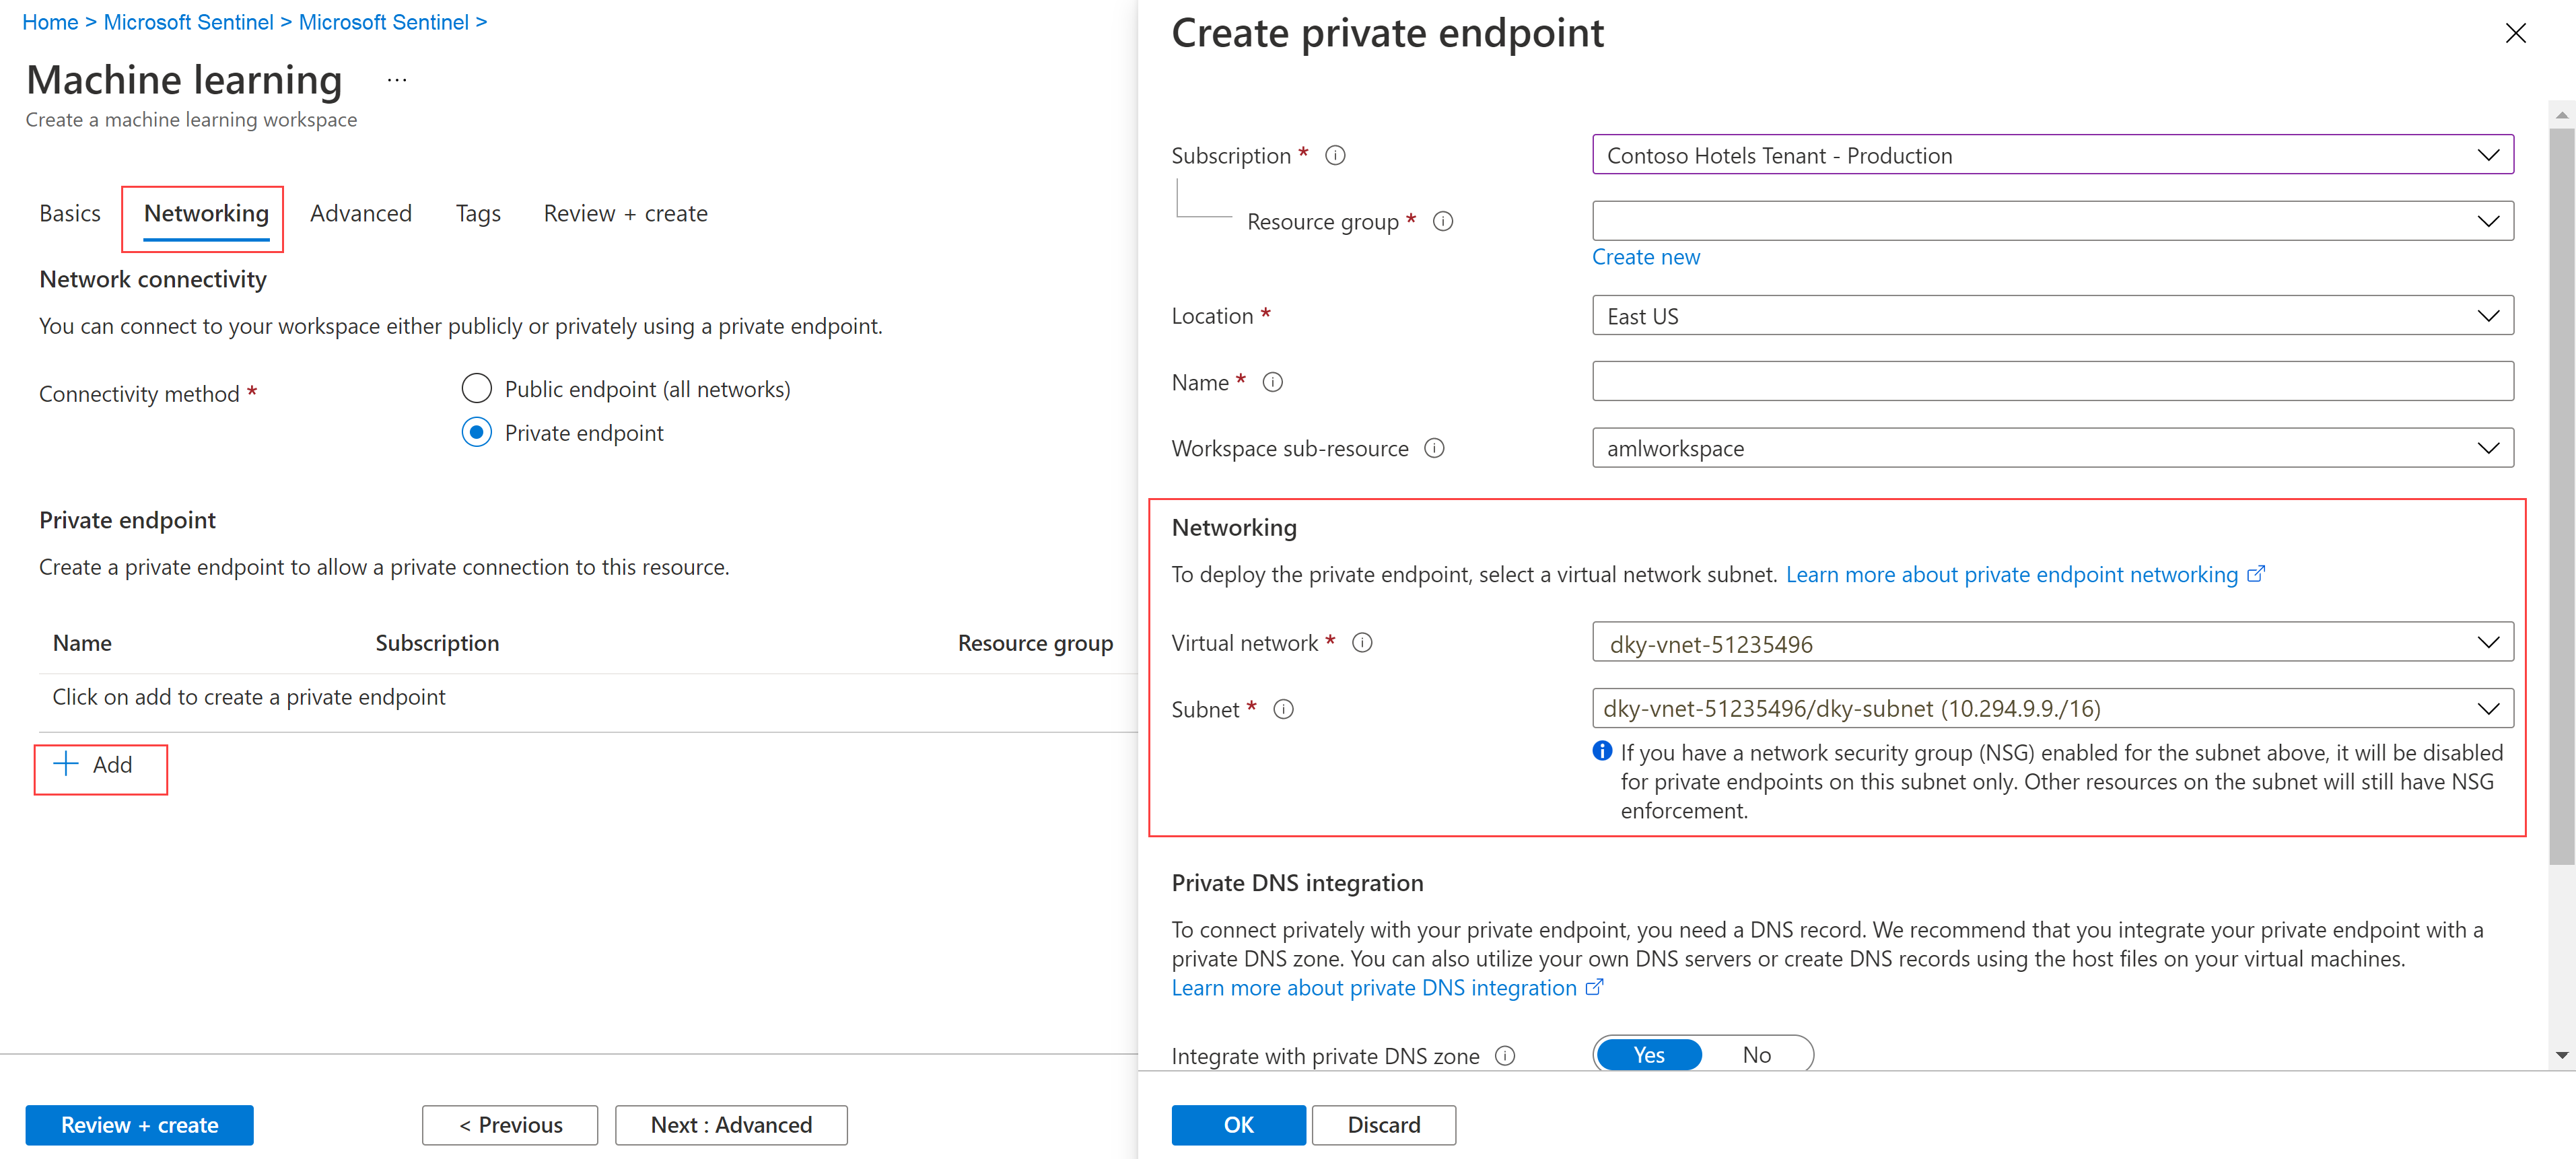 Screenshot of the Create private endpoint page in Microsoft Sentinel.